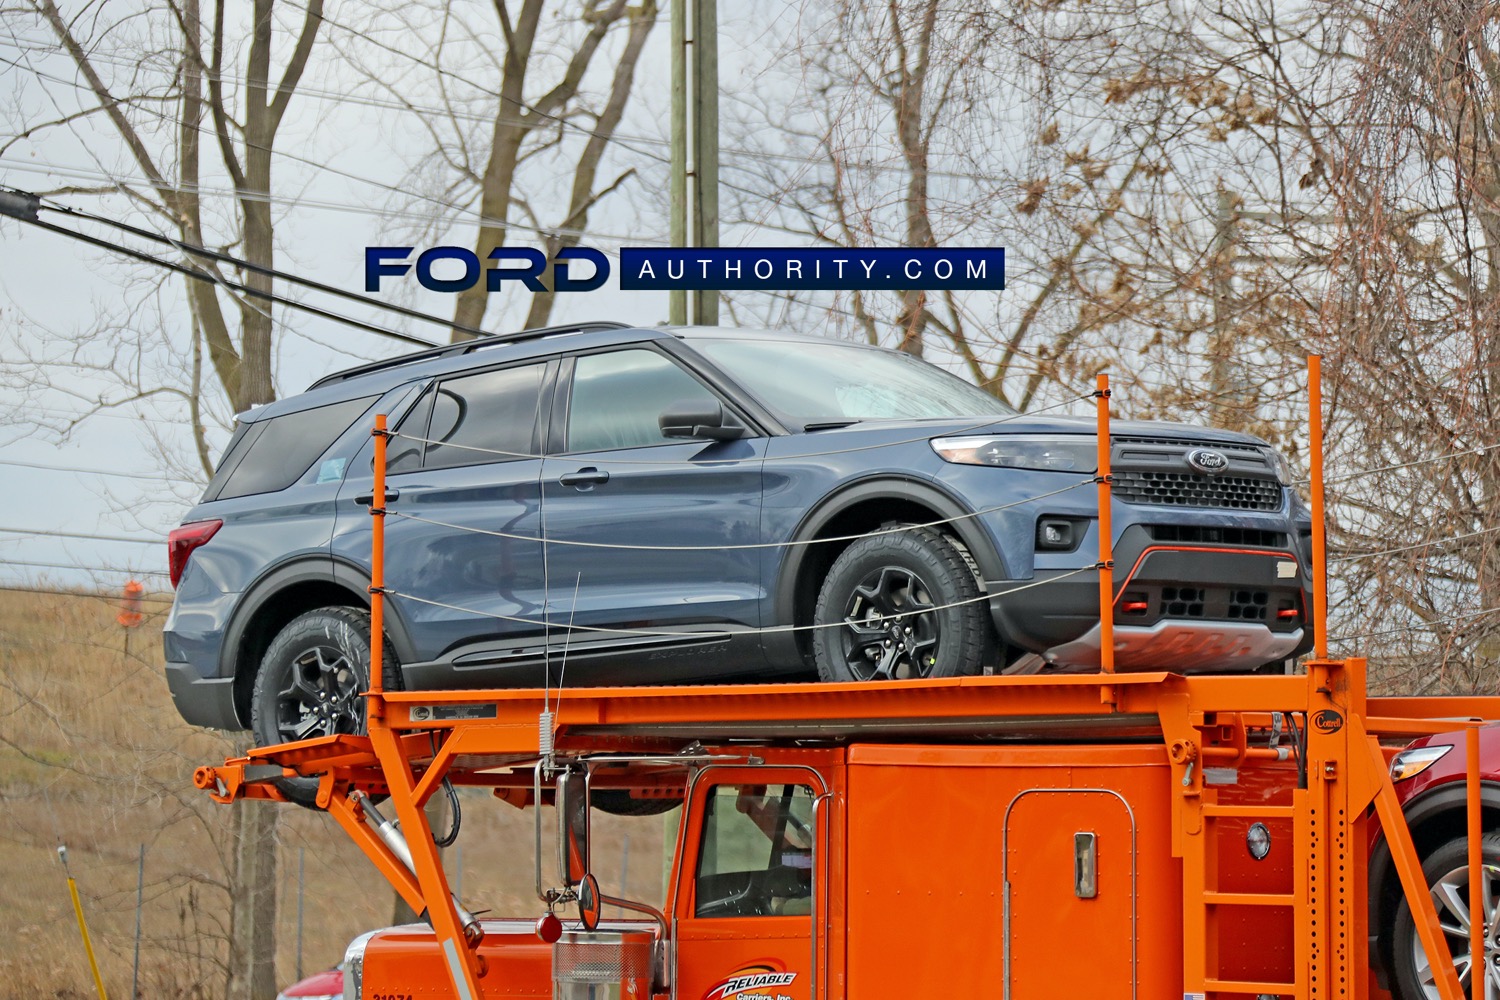 21 Ford Explorer Timberline Prototypes Spied Testing Uncovered